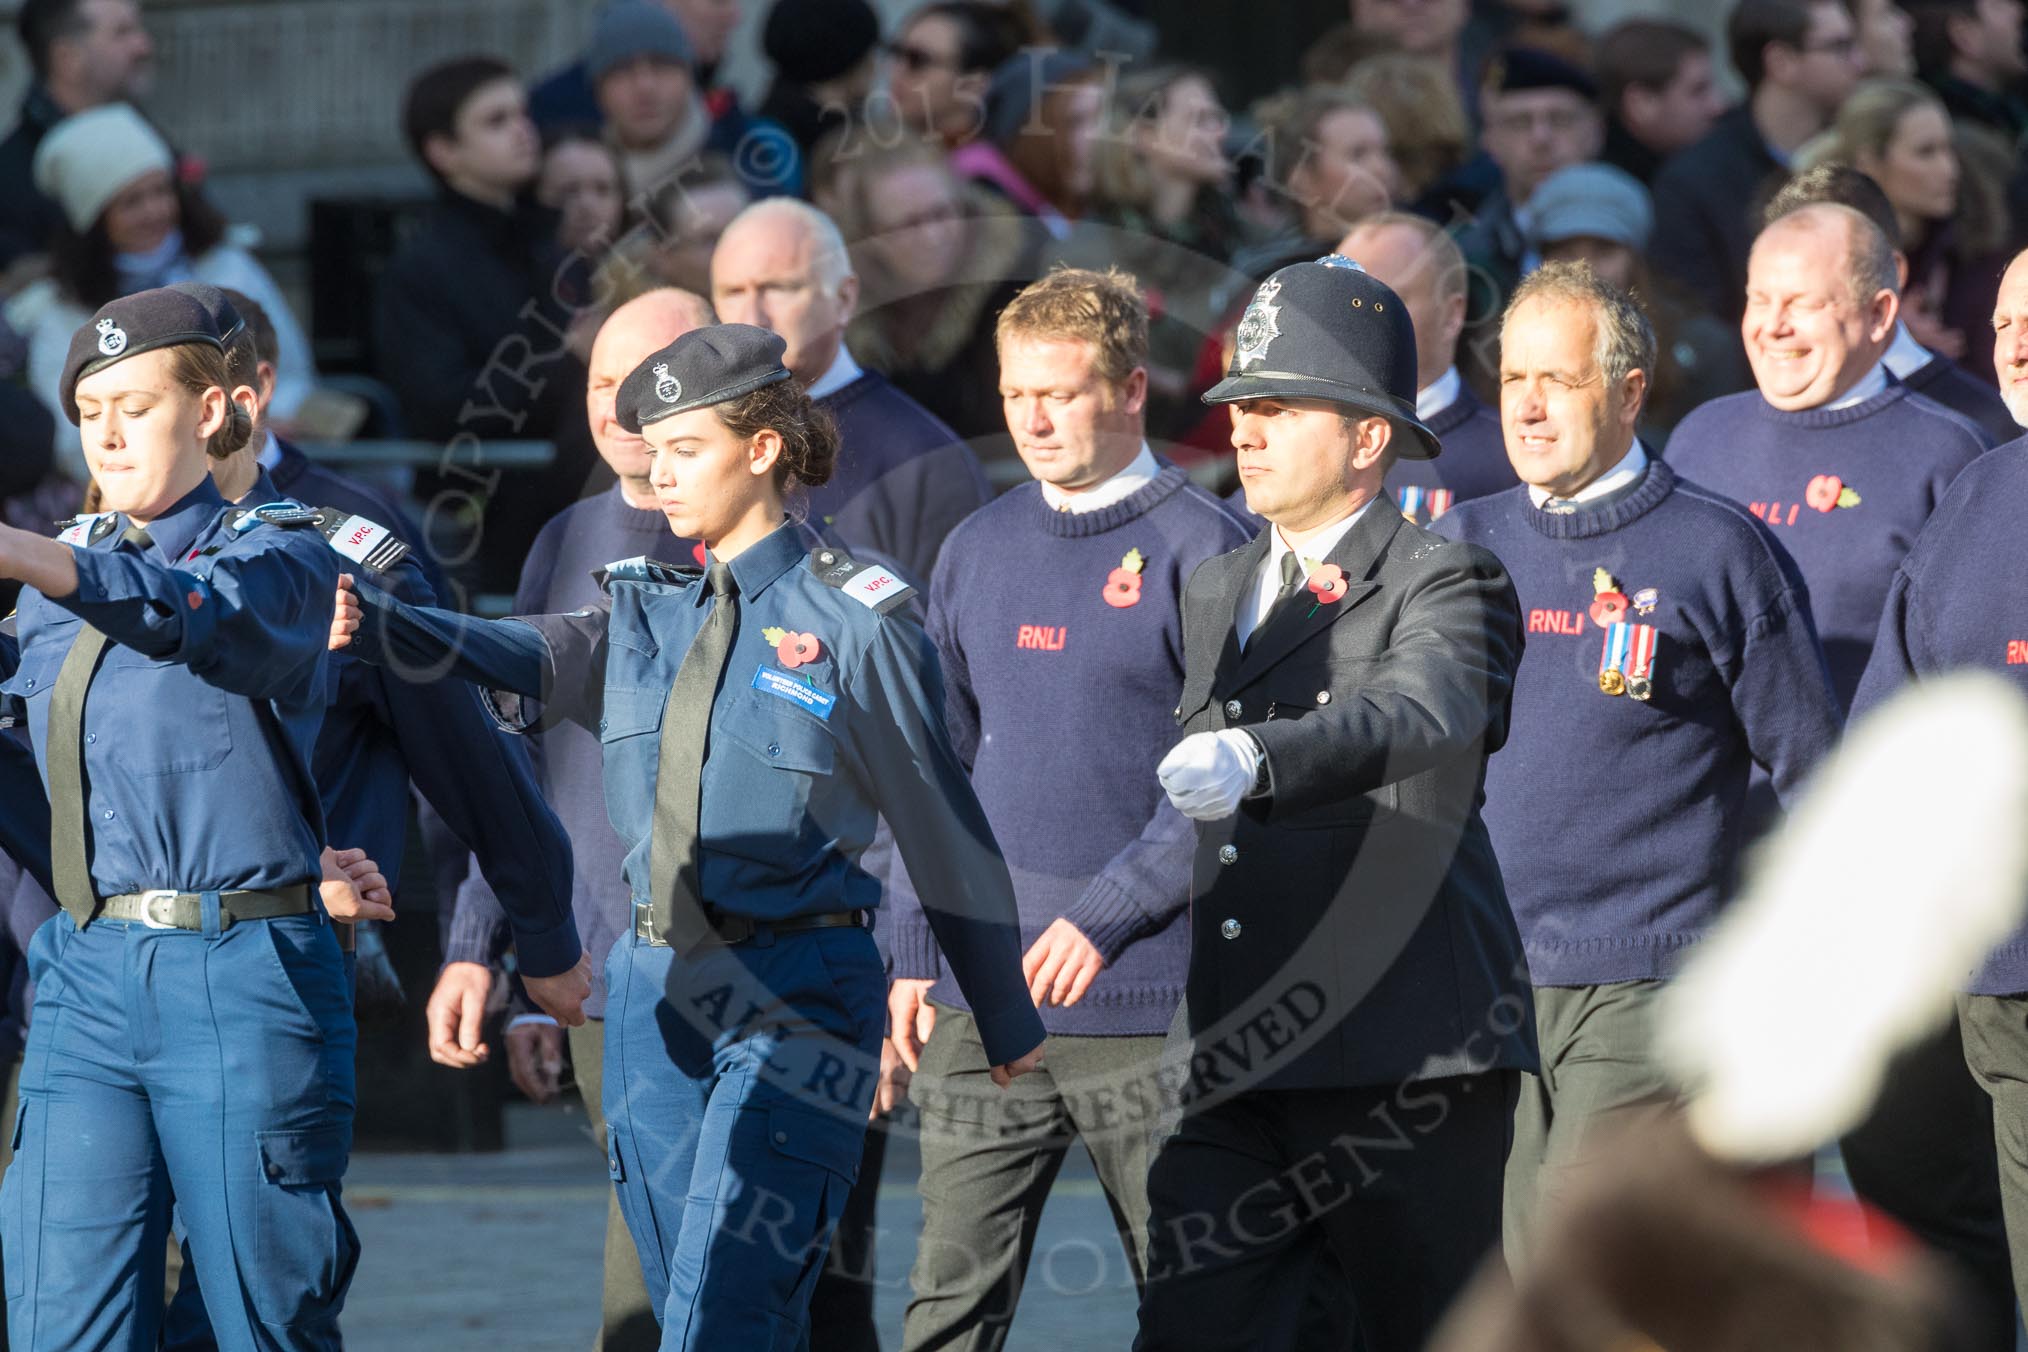 March Past, Remembrance Sunday at the Cenotaph 2016: M41 Royal National Lifeboat Institution.
Cenotaph, Whitehall, London SW1,
London,
Greater London,
United Kingdom,
on 13 November 2016 at 13:19, image #2947